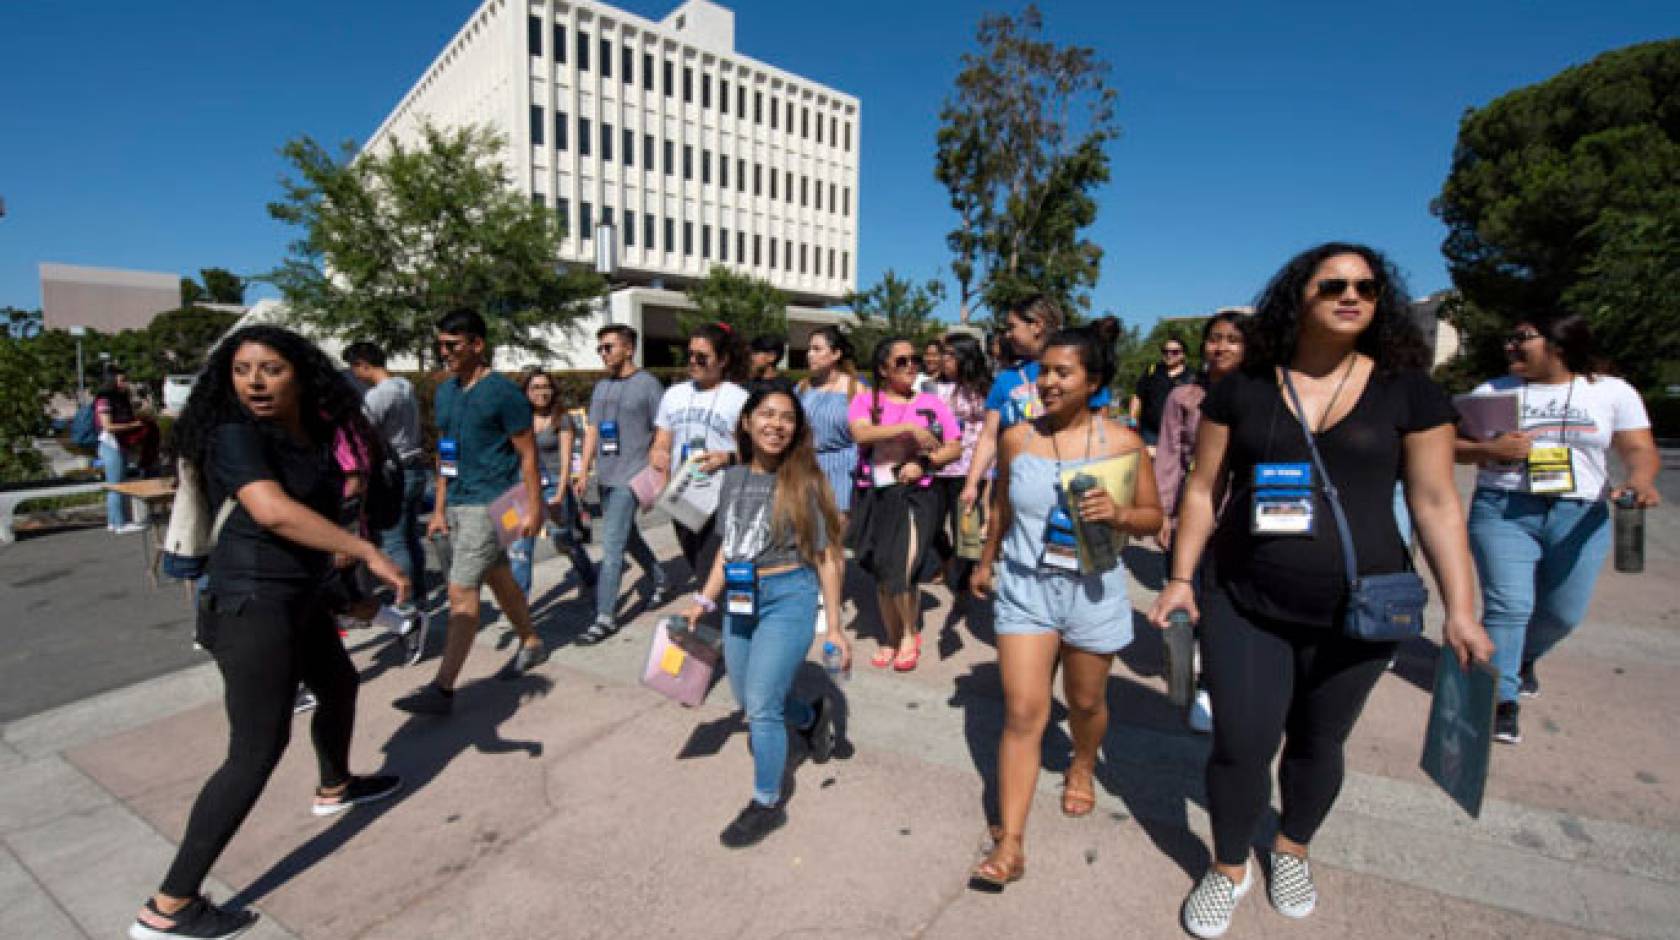 Students walking on the UC Irvine campus